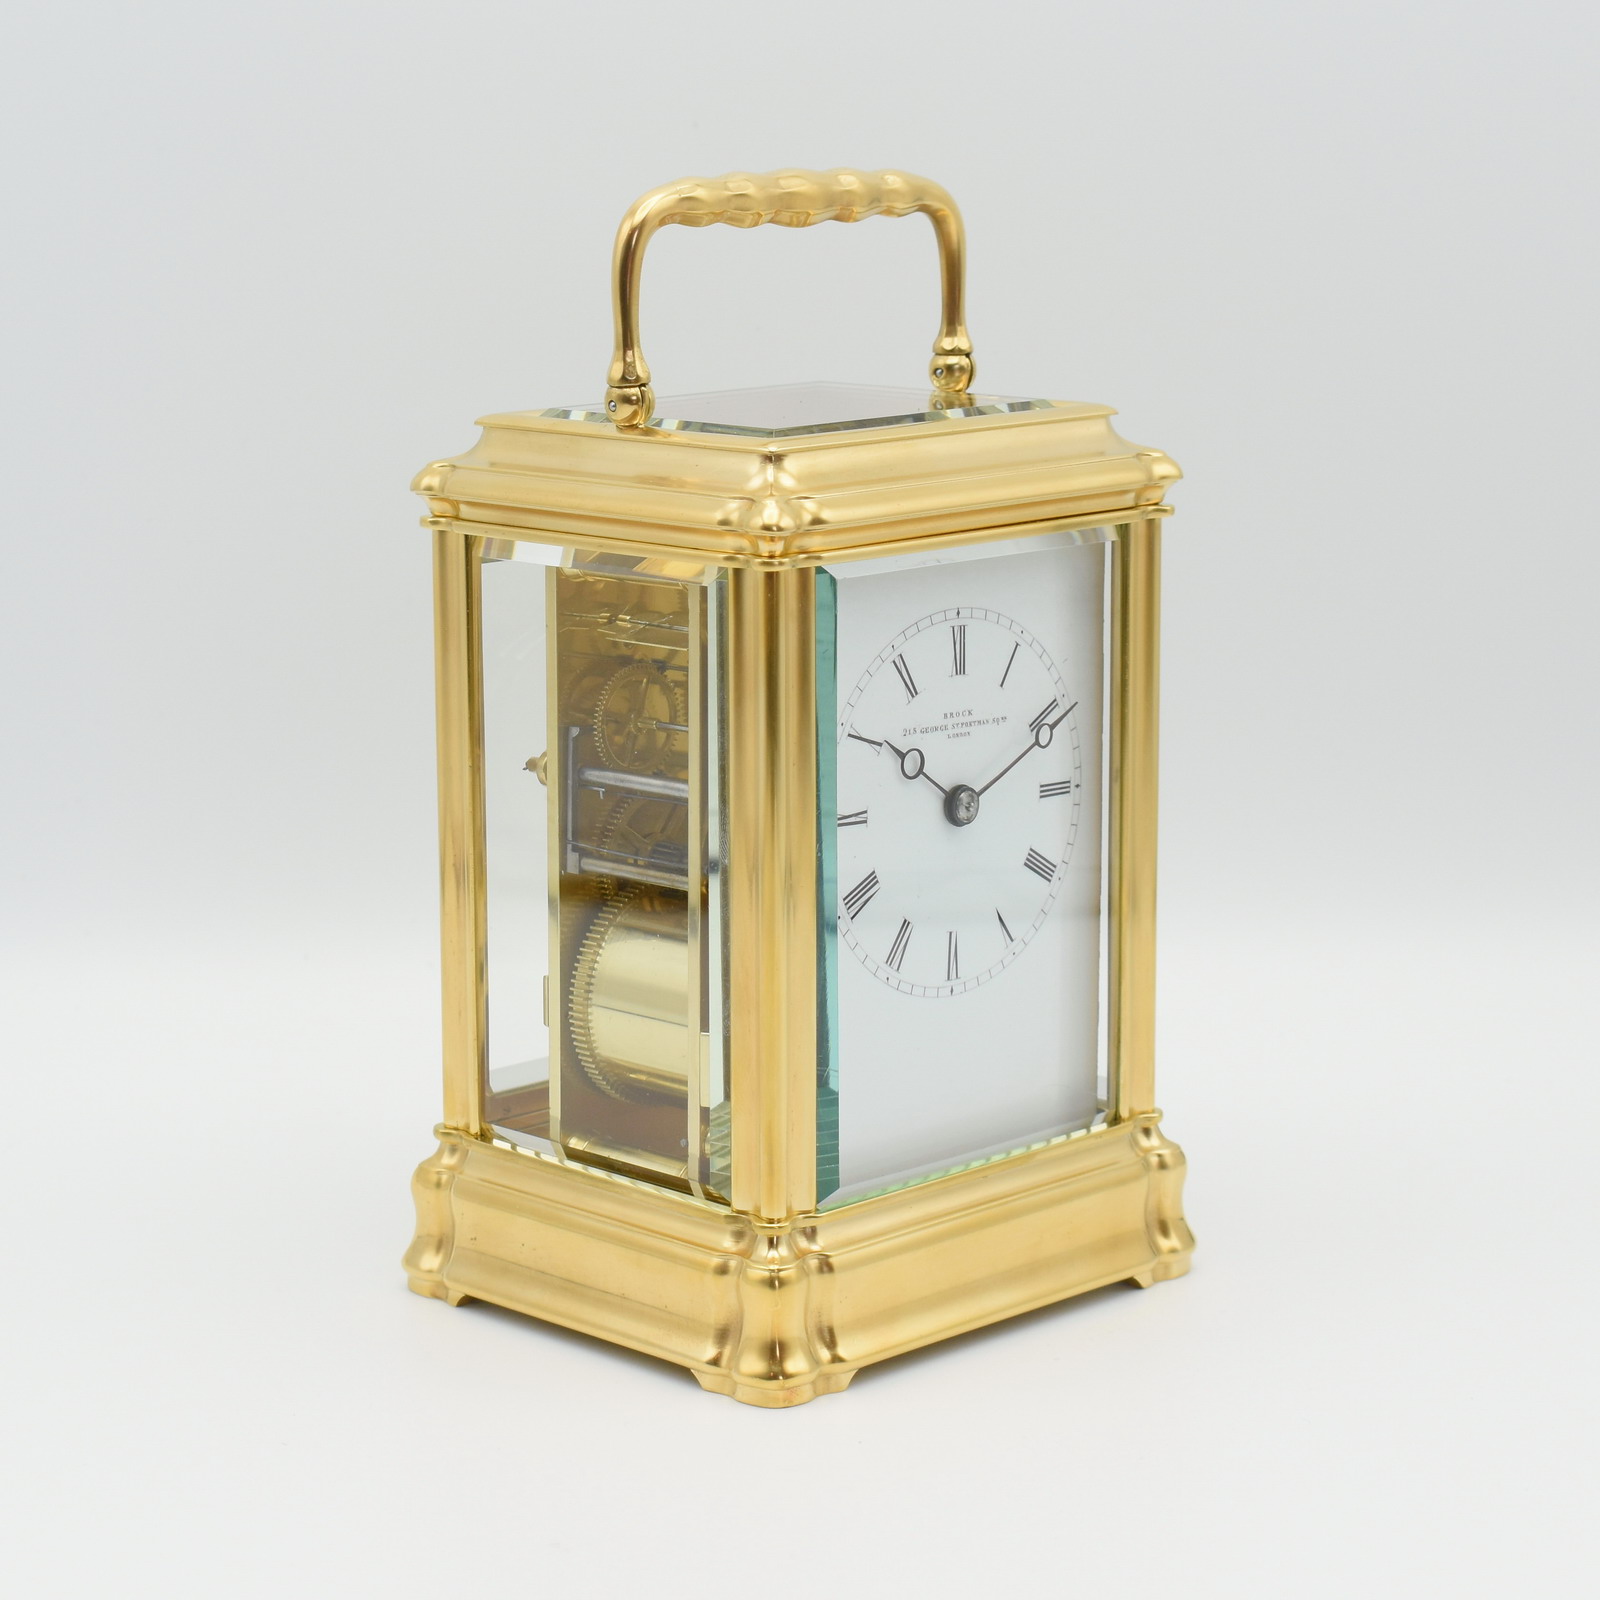 Brock – Henri Jacot Carriage Clock – It's About Time